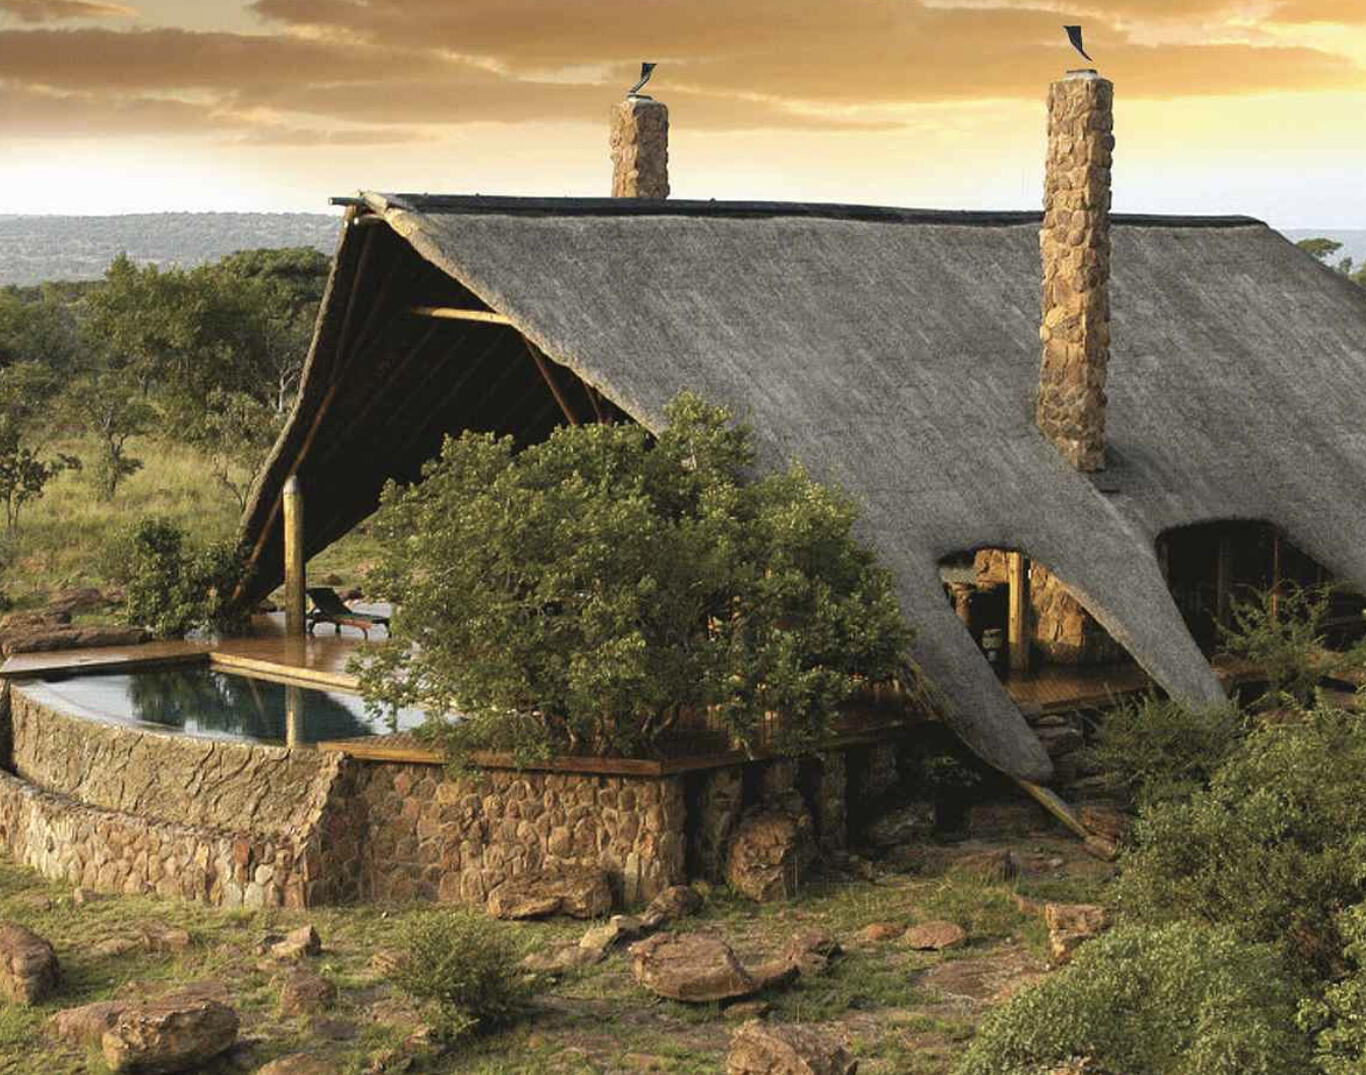 4 Seasons of Sediba: When is the best time to visit?  